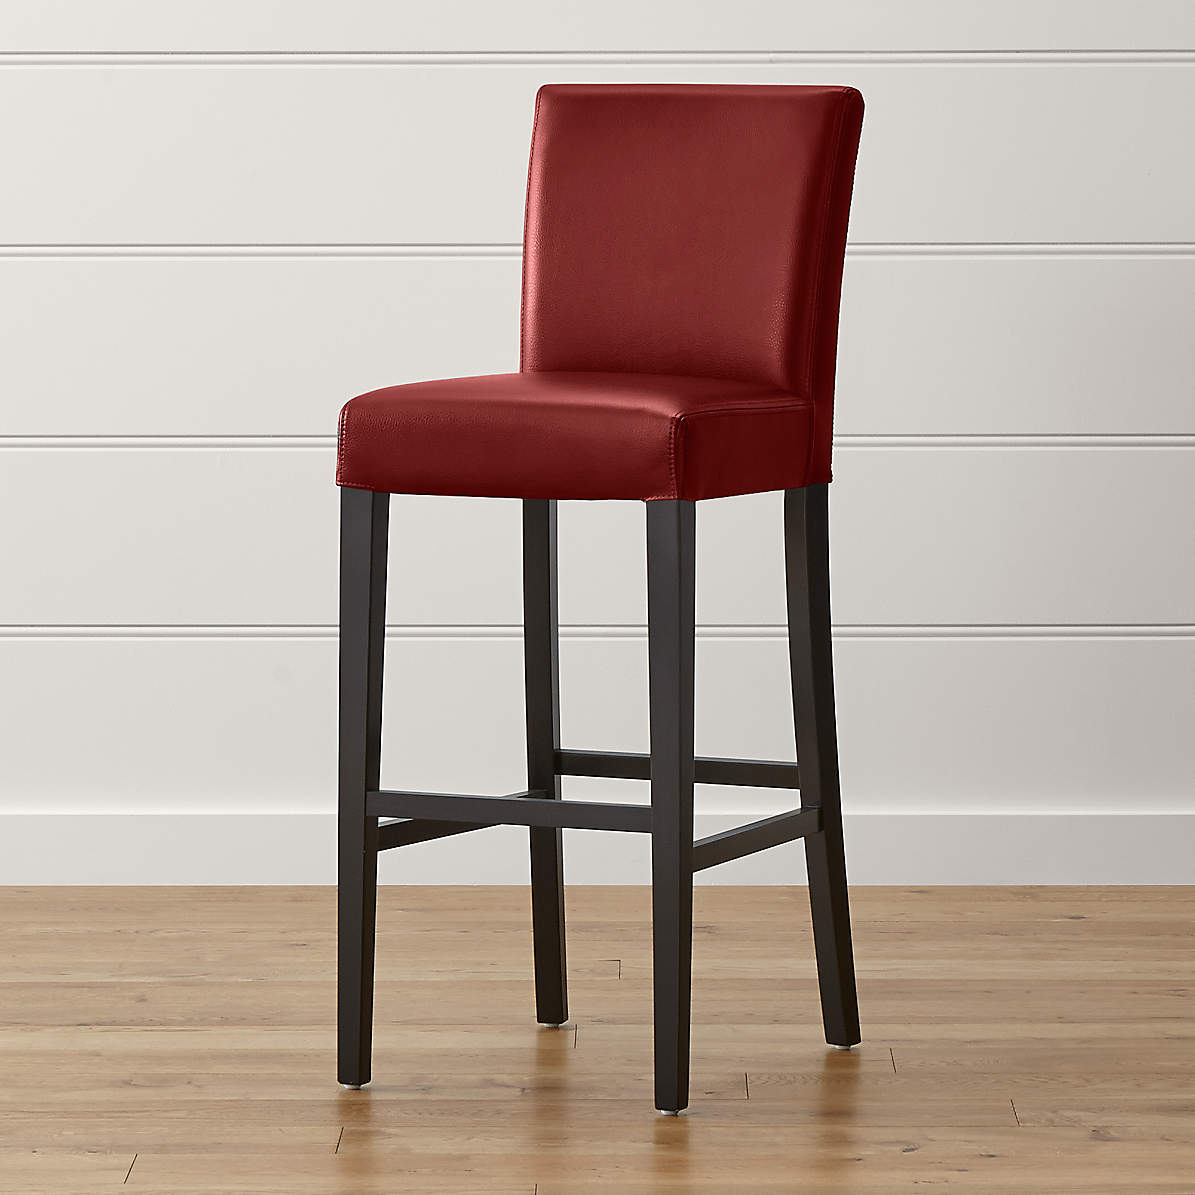 Lowe Red Leather Bar Stool Reviews, Red Leather Bar Stools With Arms